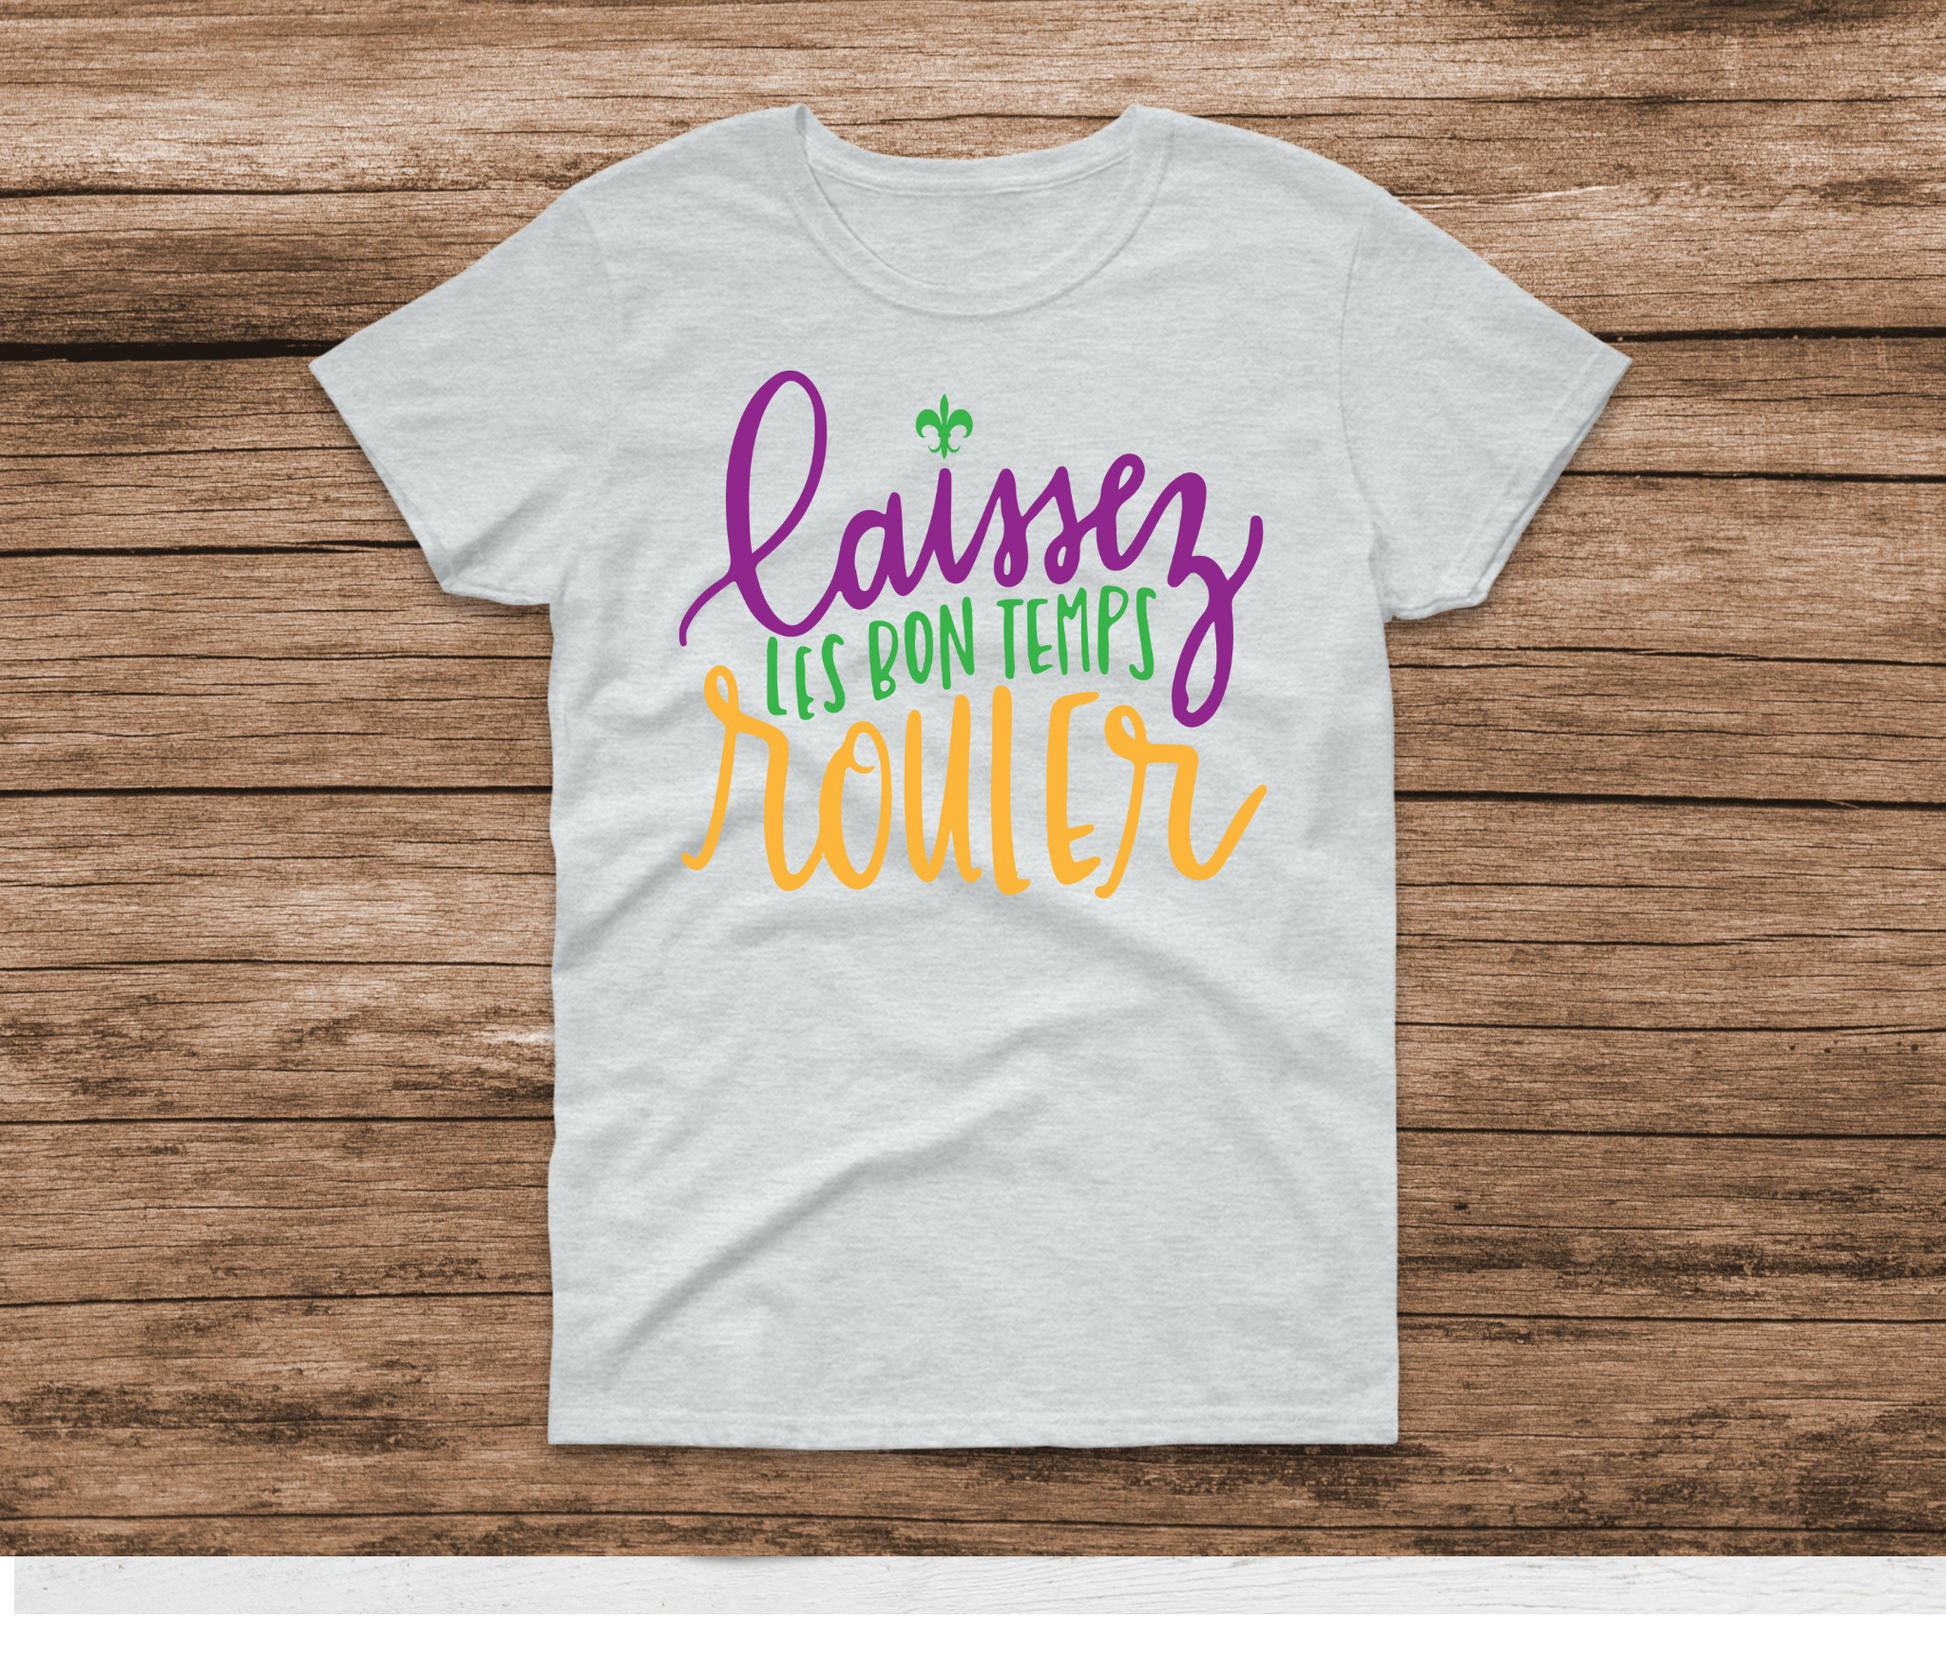 Let the Good Time's Roll Mardi Gras T-shirt for Women -  in 2023